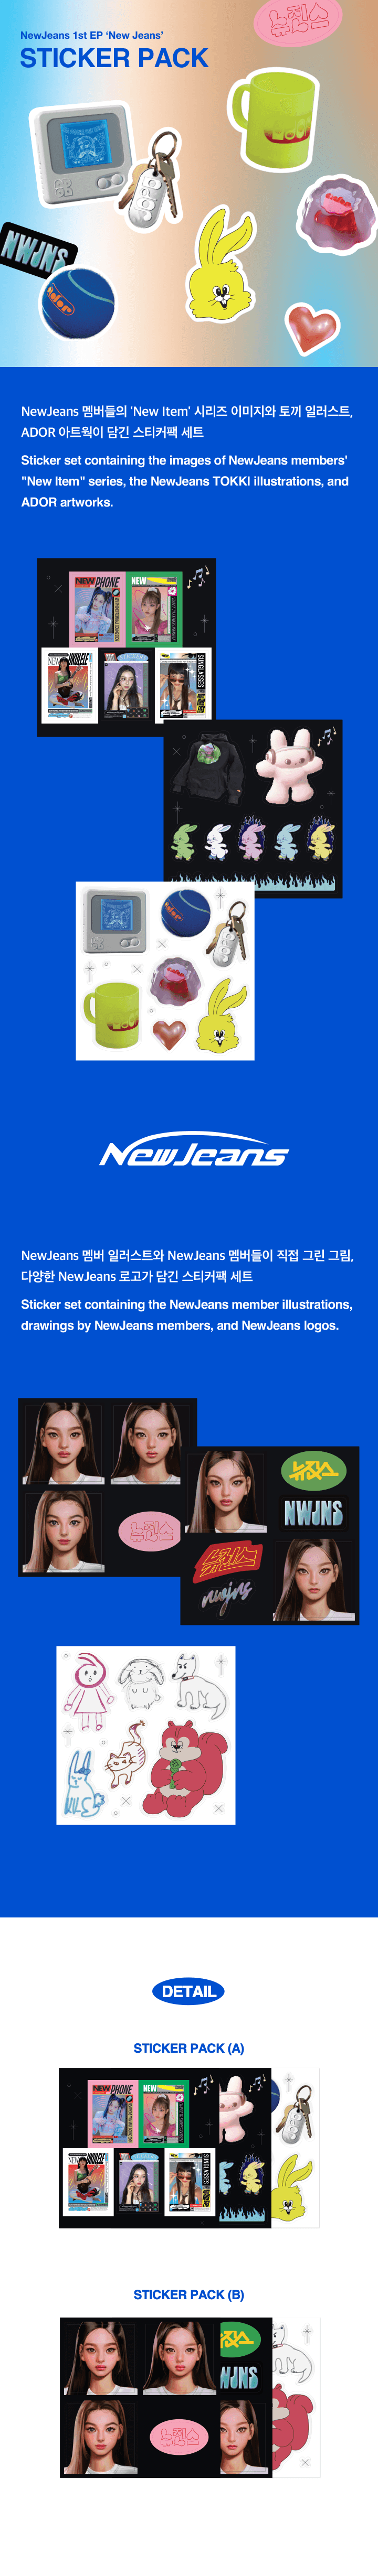 NewJeans Tell Me sticker pack